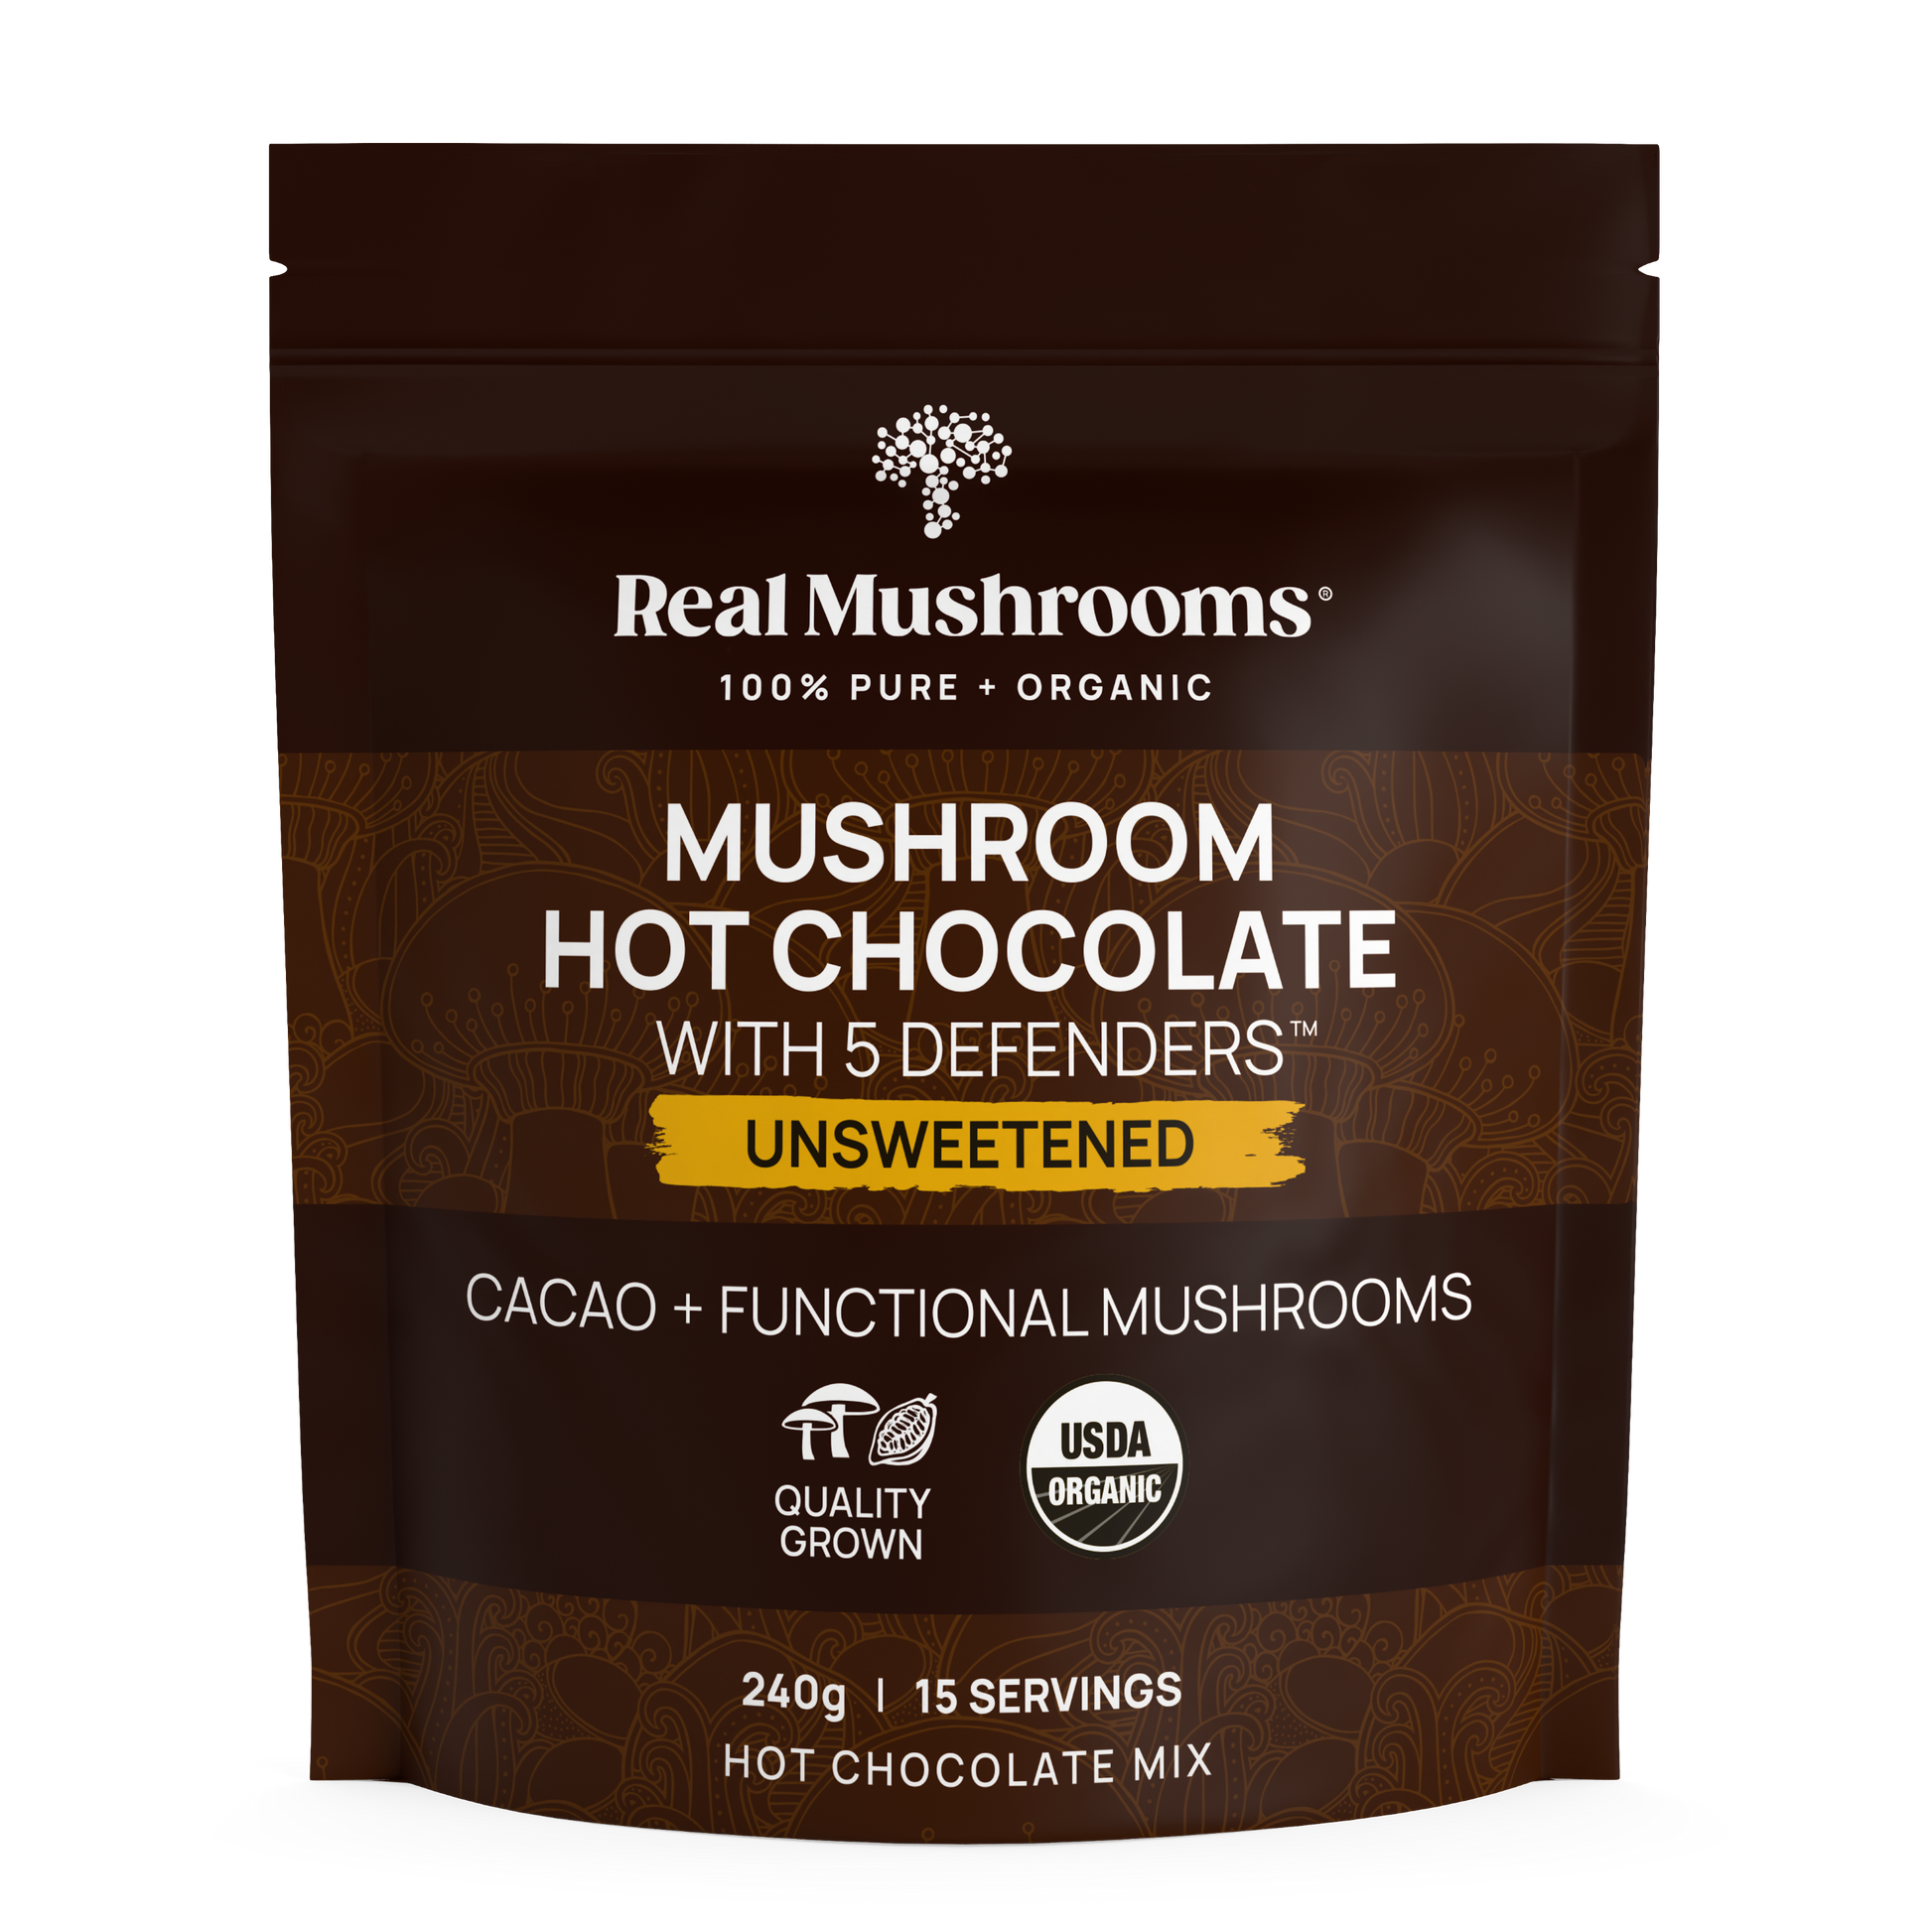 Real Mushrooms Mushroom Hot Chocolate Mix with unsweetened cocoa.